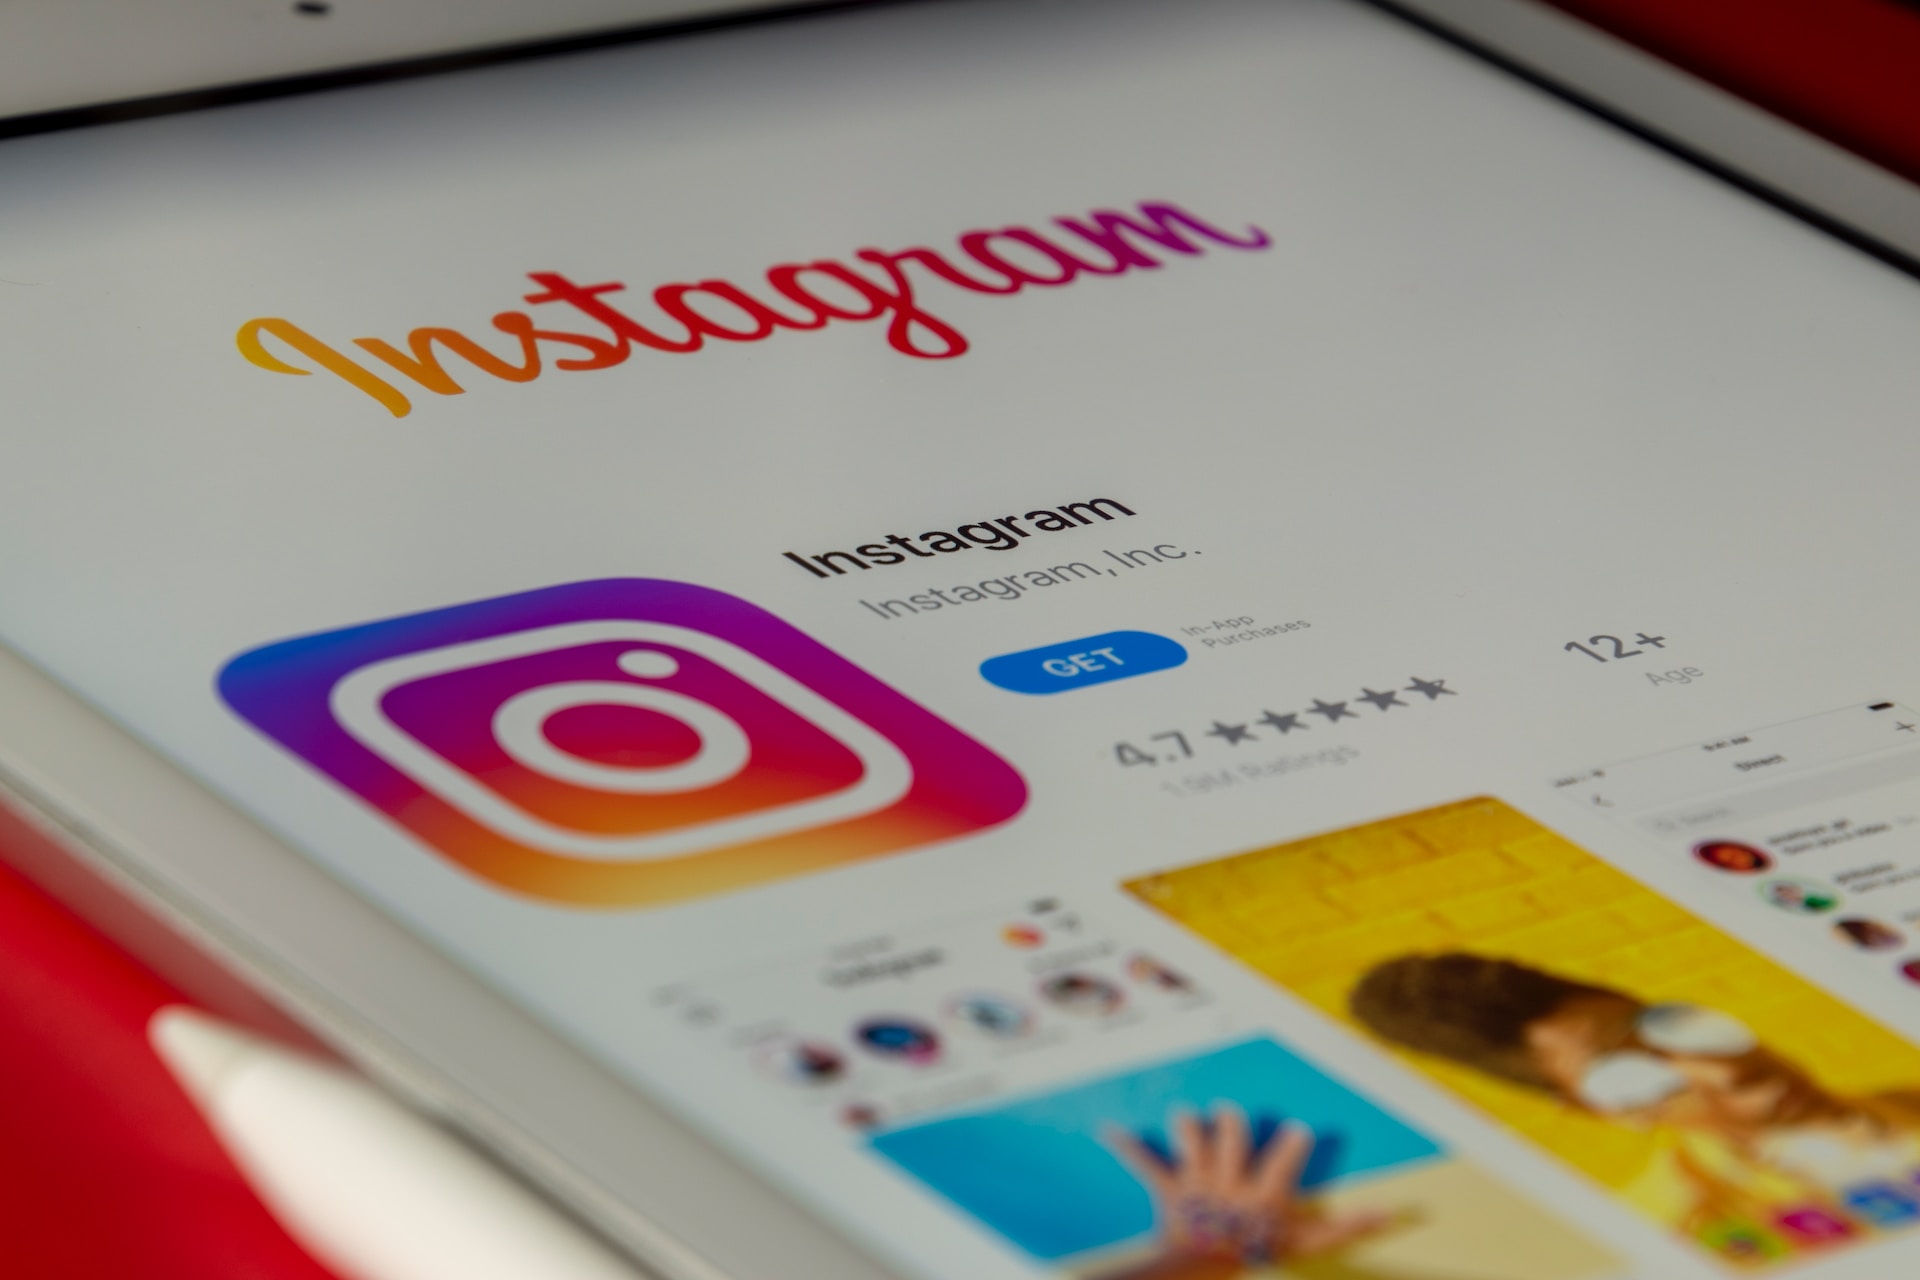 ASA collaborates with Instagram influencers to promote best practices